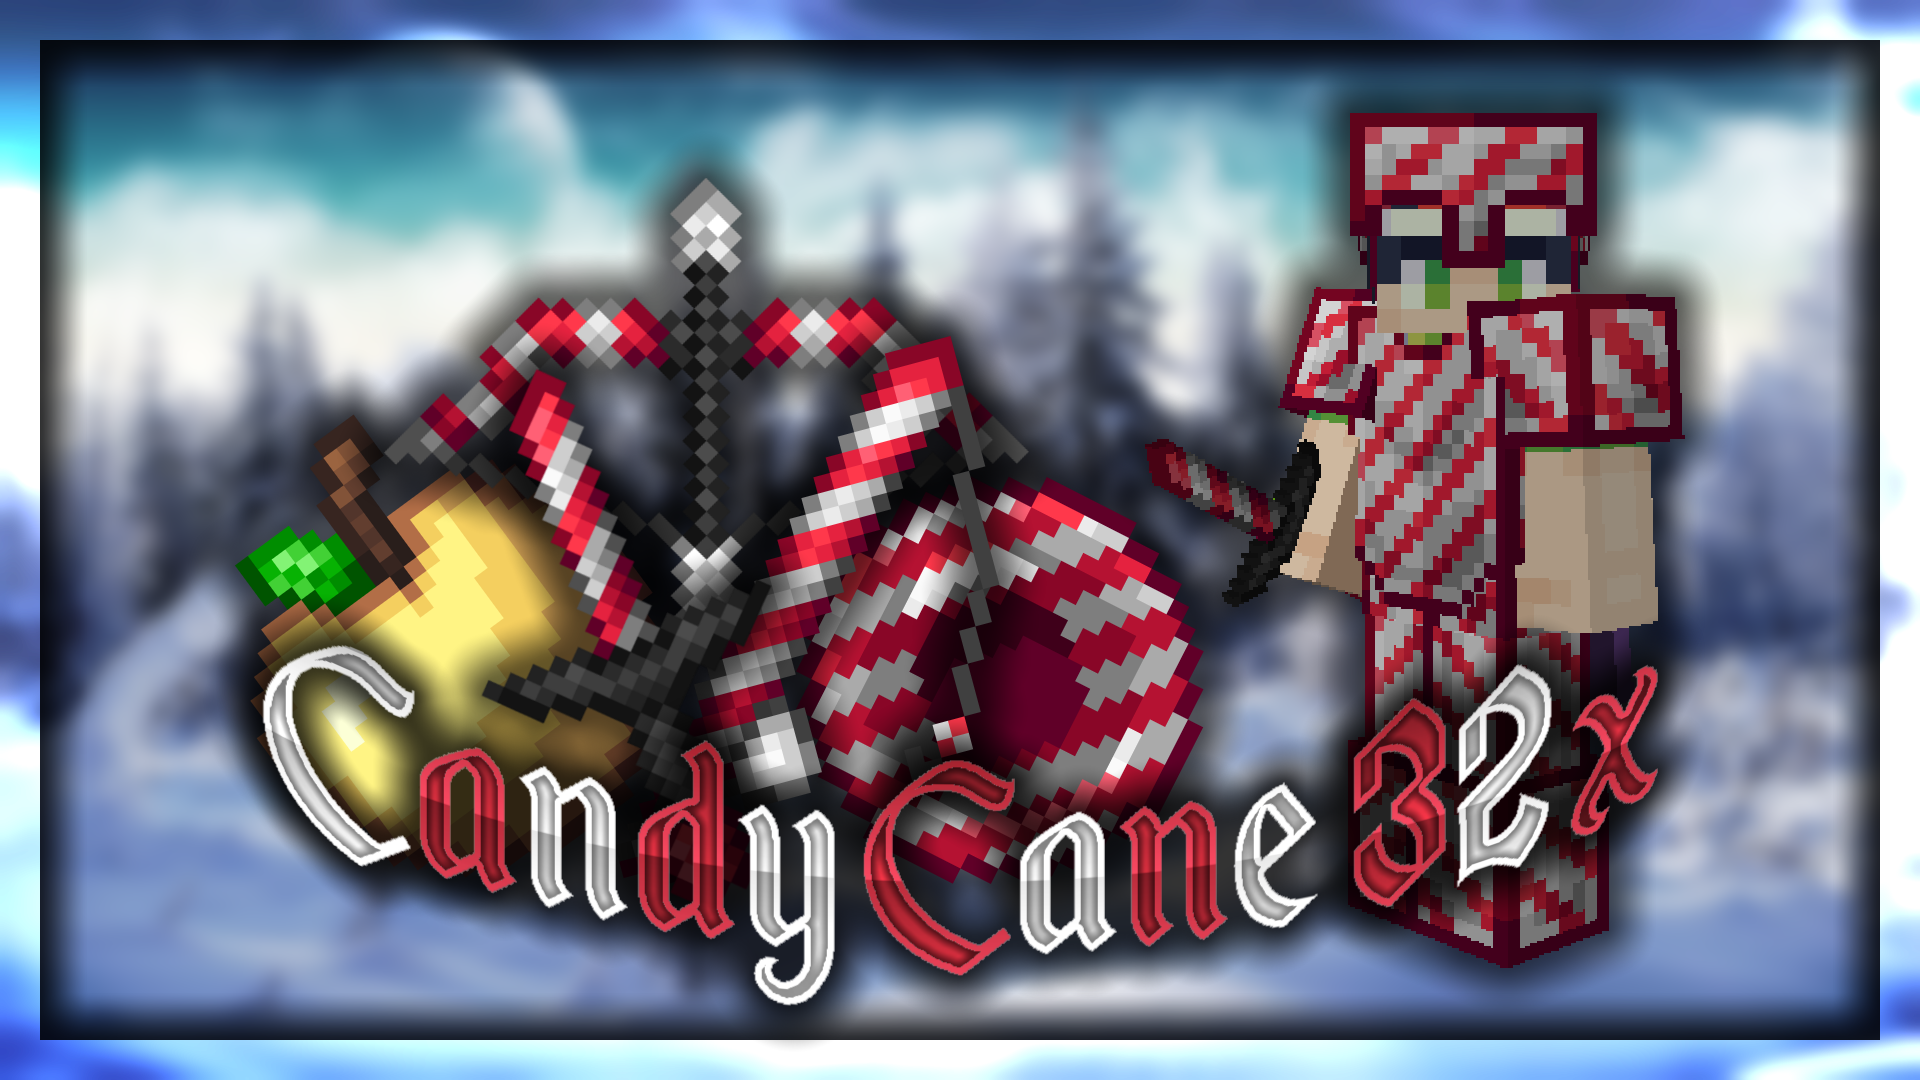 Gallery Banner for Candy Cane on PvPRP